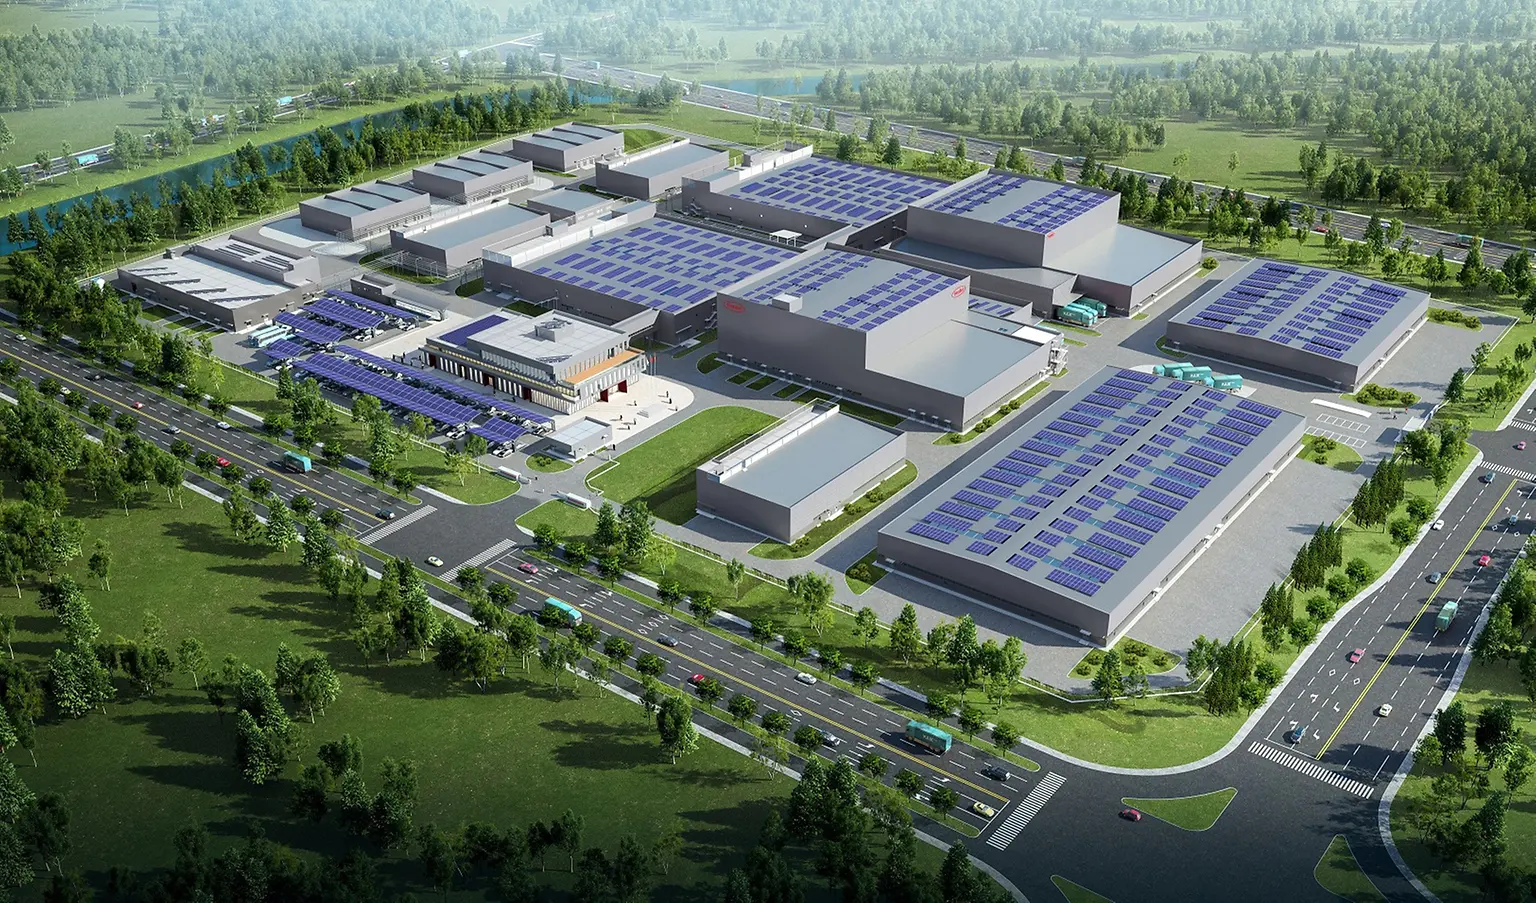 
The sustainable state-of-the-art factory has been designed to meet the demand of fast-growing industries including electronics, automotive, medical, equipment manufacturing, and aerospace.